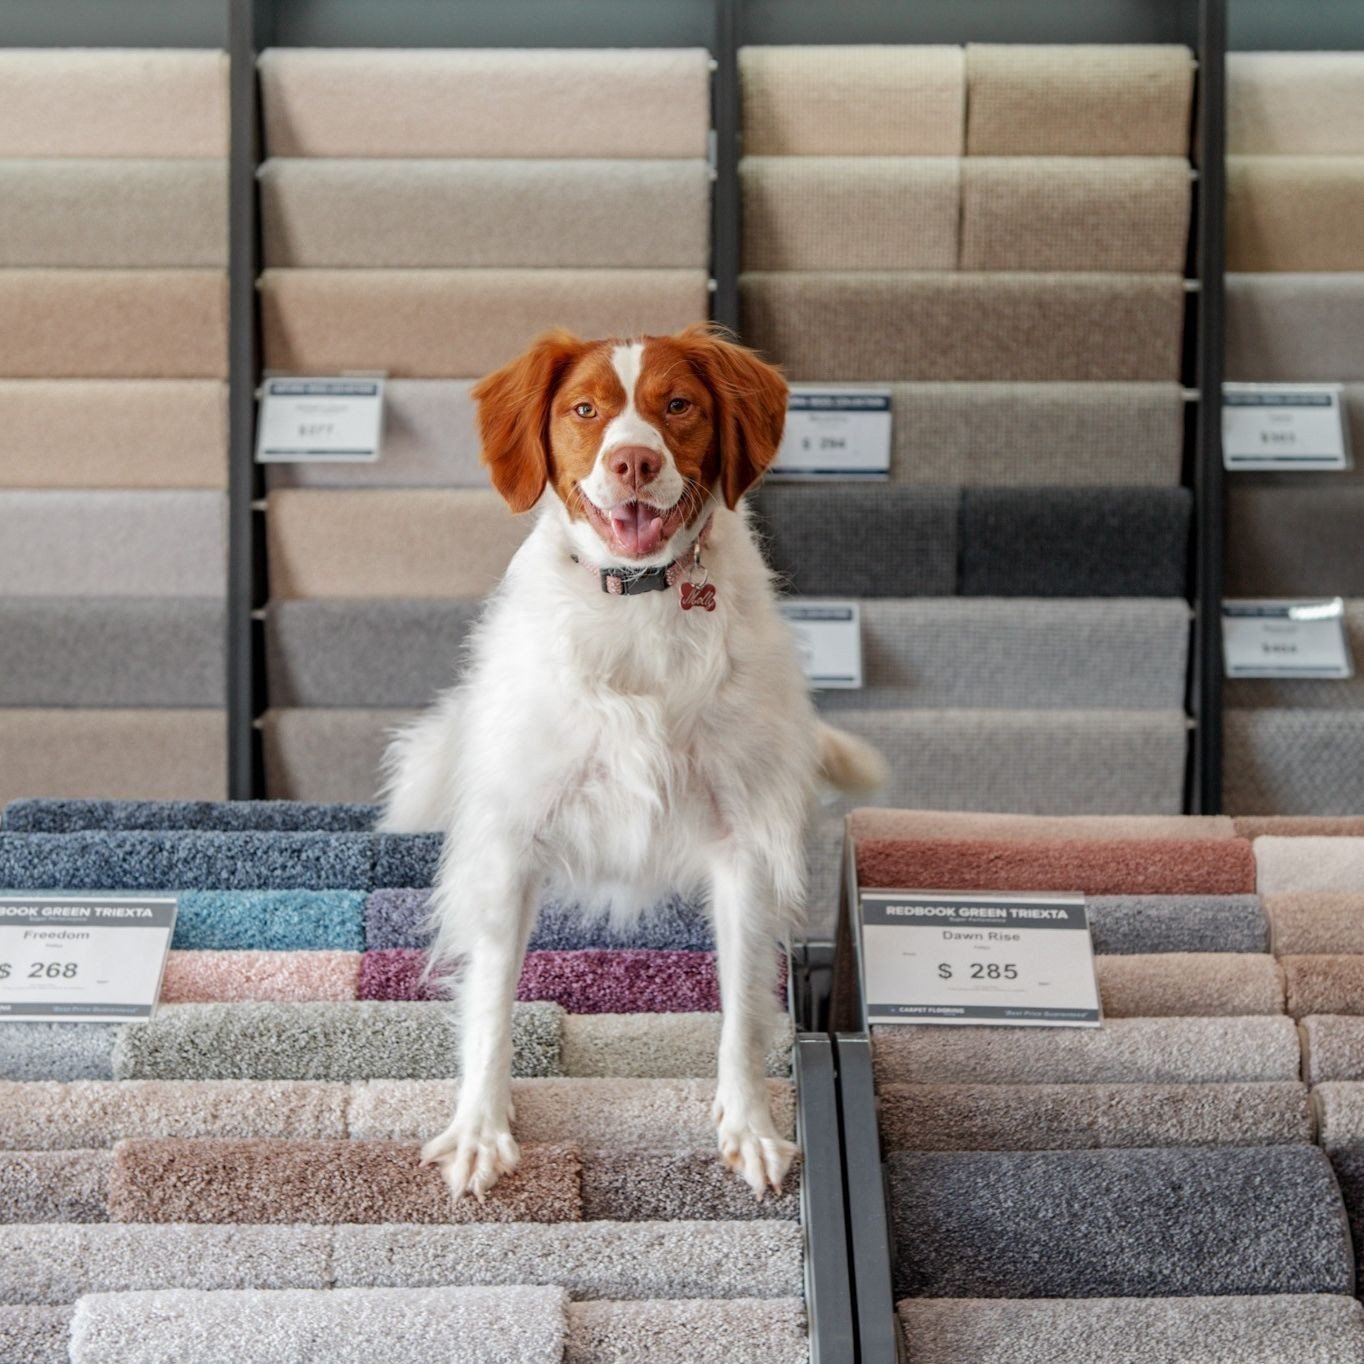 Transform your home with the warmth of our luxurious carpets. Visit our showrooms across Victoria and let us provide you with a free, no-obligation measure and quote today. 🏡⁠
carpetflooringgroup.com.au/free-measure-quote